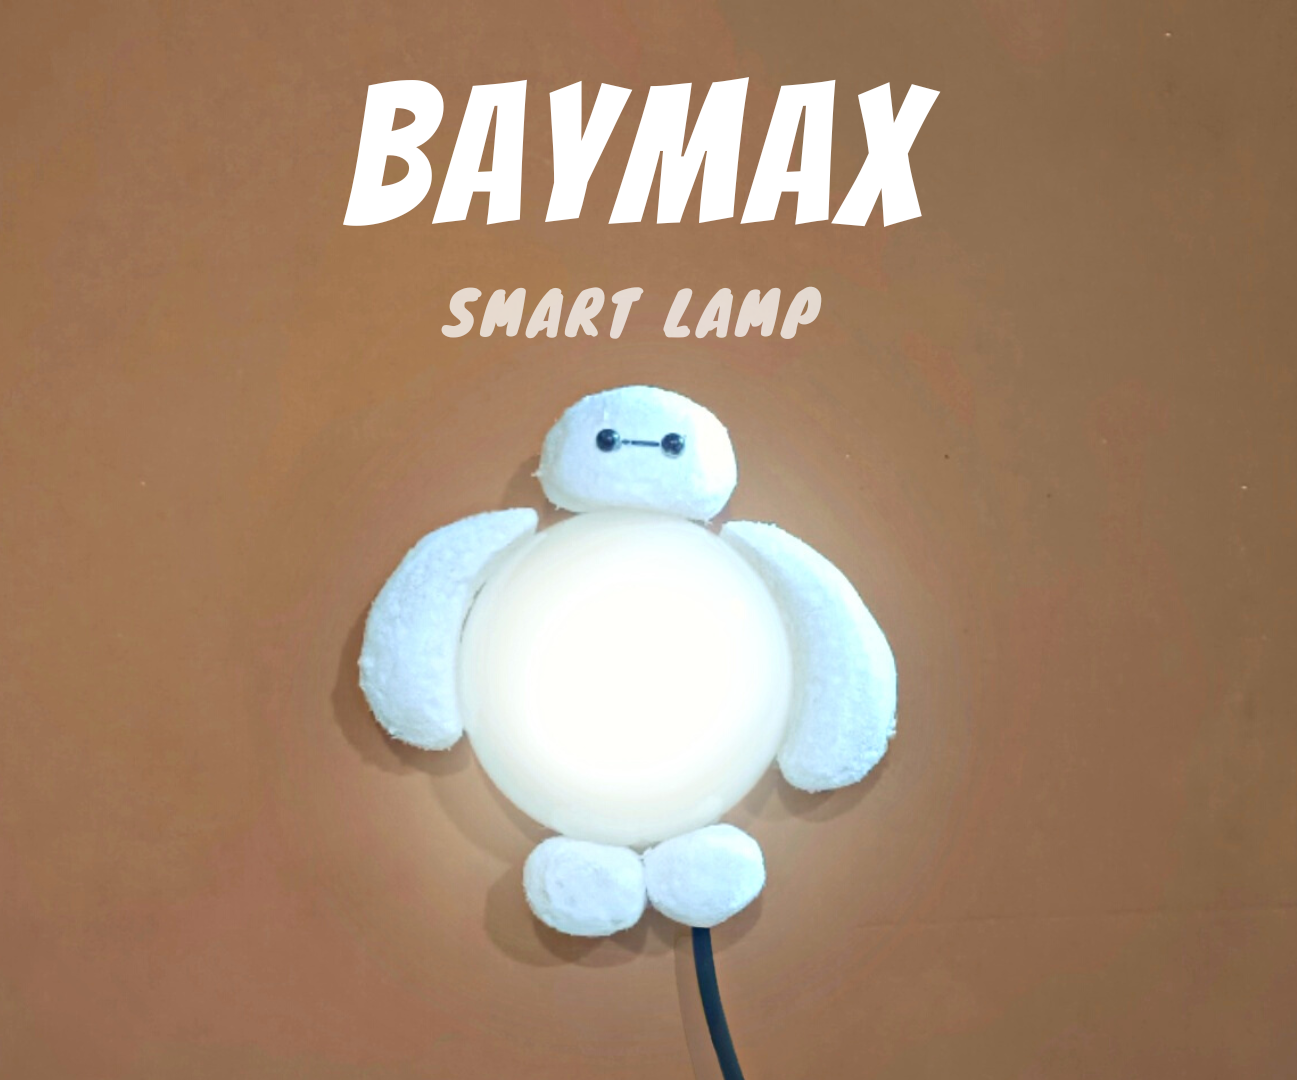 Baymax Lamp - Helps You Take Medications on Time